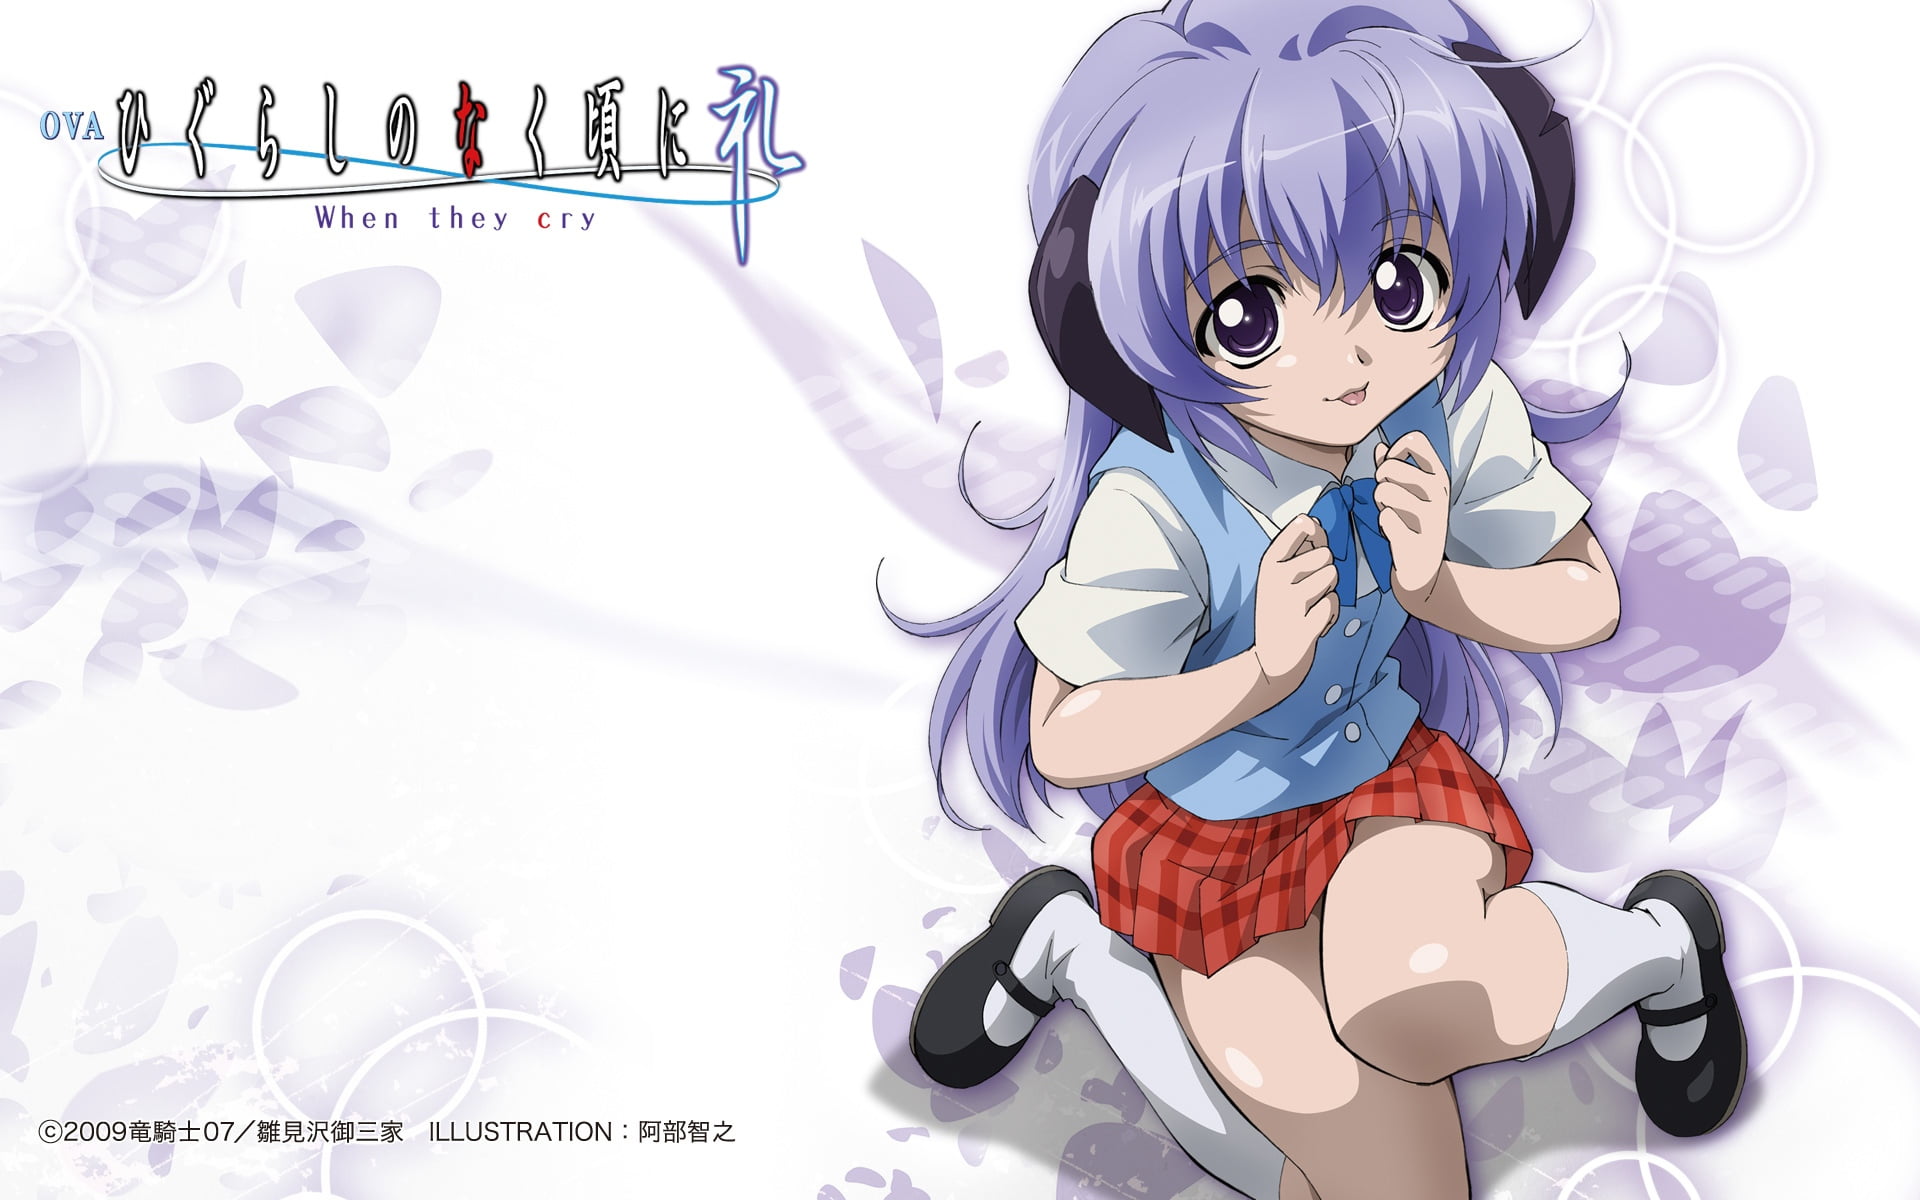 purple-haired female anime character illustration with text overlay